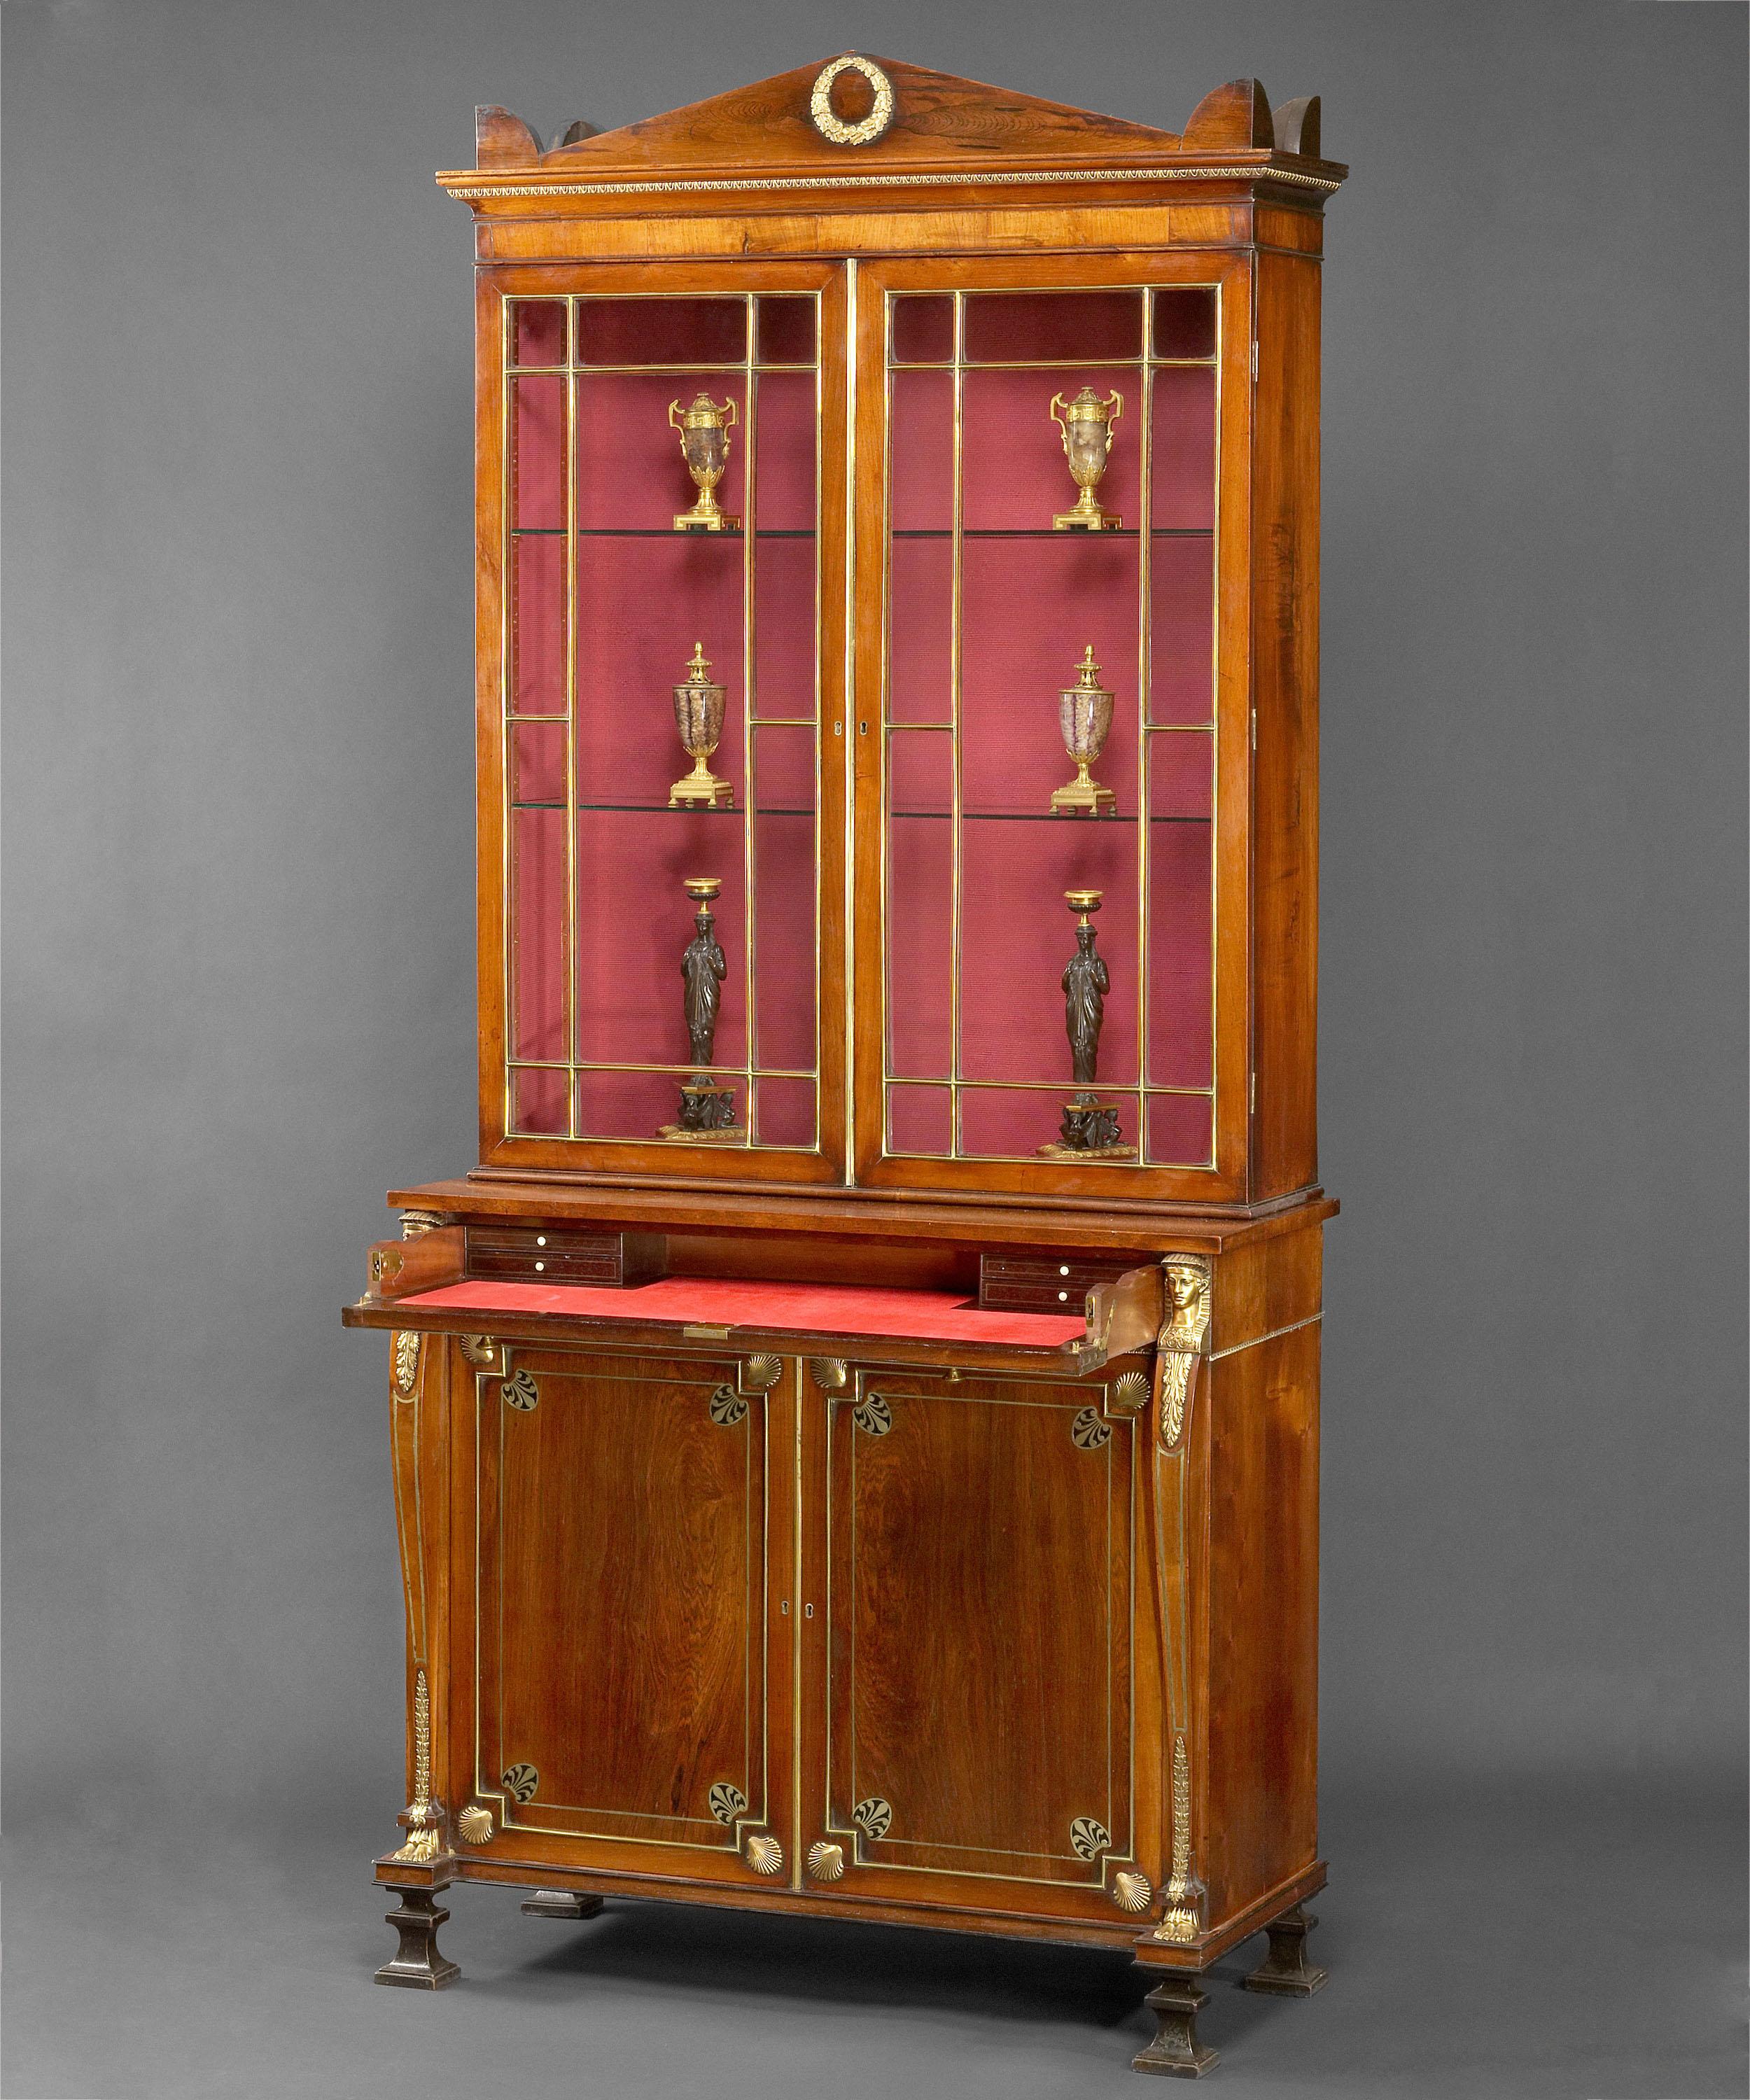 Early 19th Century Regency Period Rosewood and Ormolu Mounted Secretaire Cabinet For Sale 1